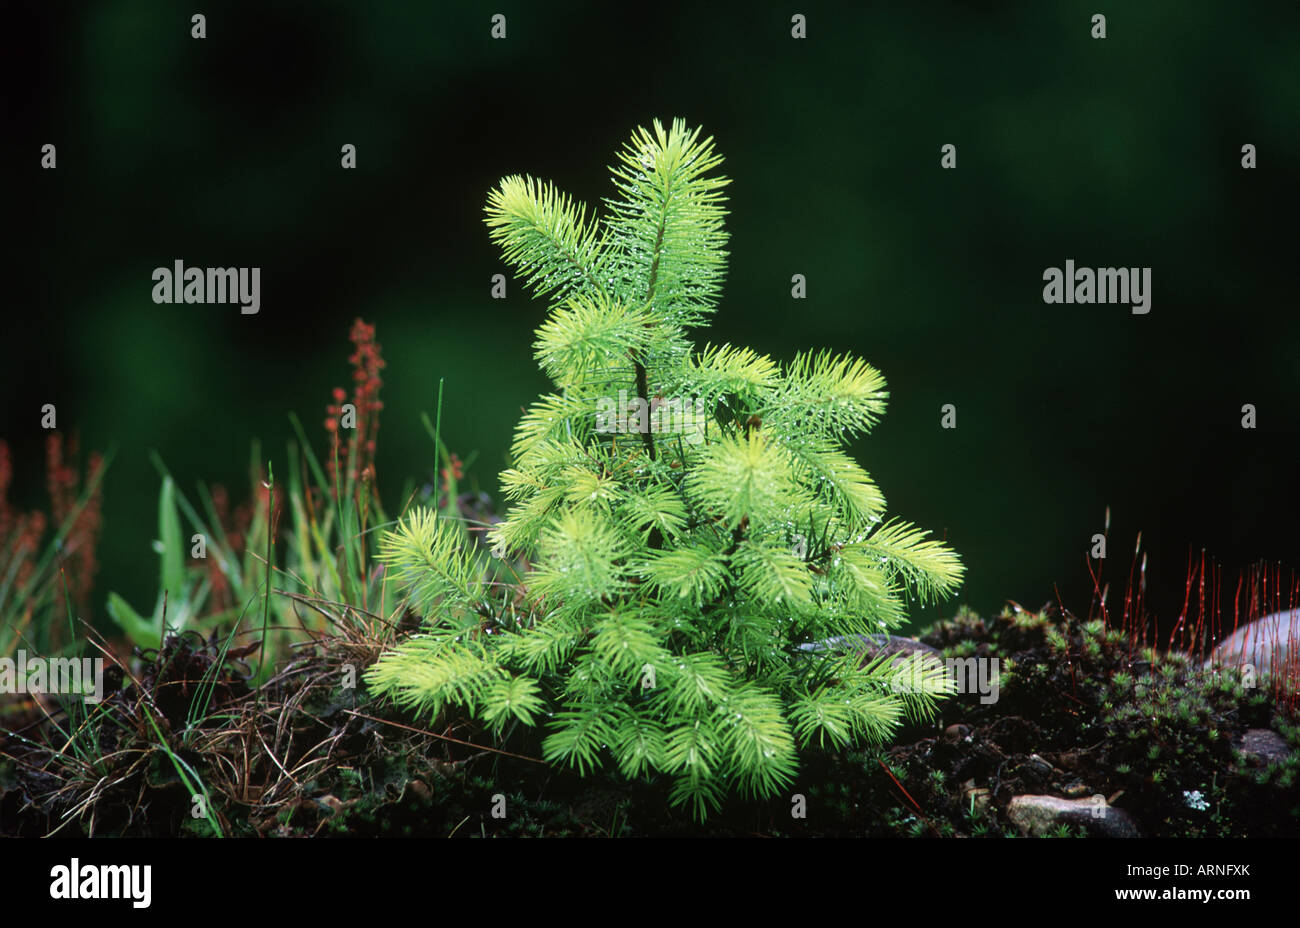 Young Fir tree flushing new tips in spring time, British Columbia, Canada. Stock Photo